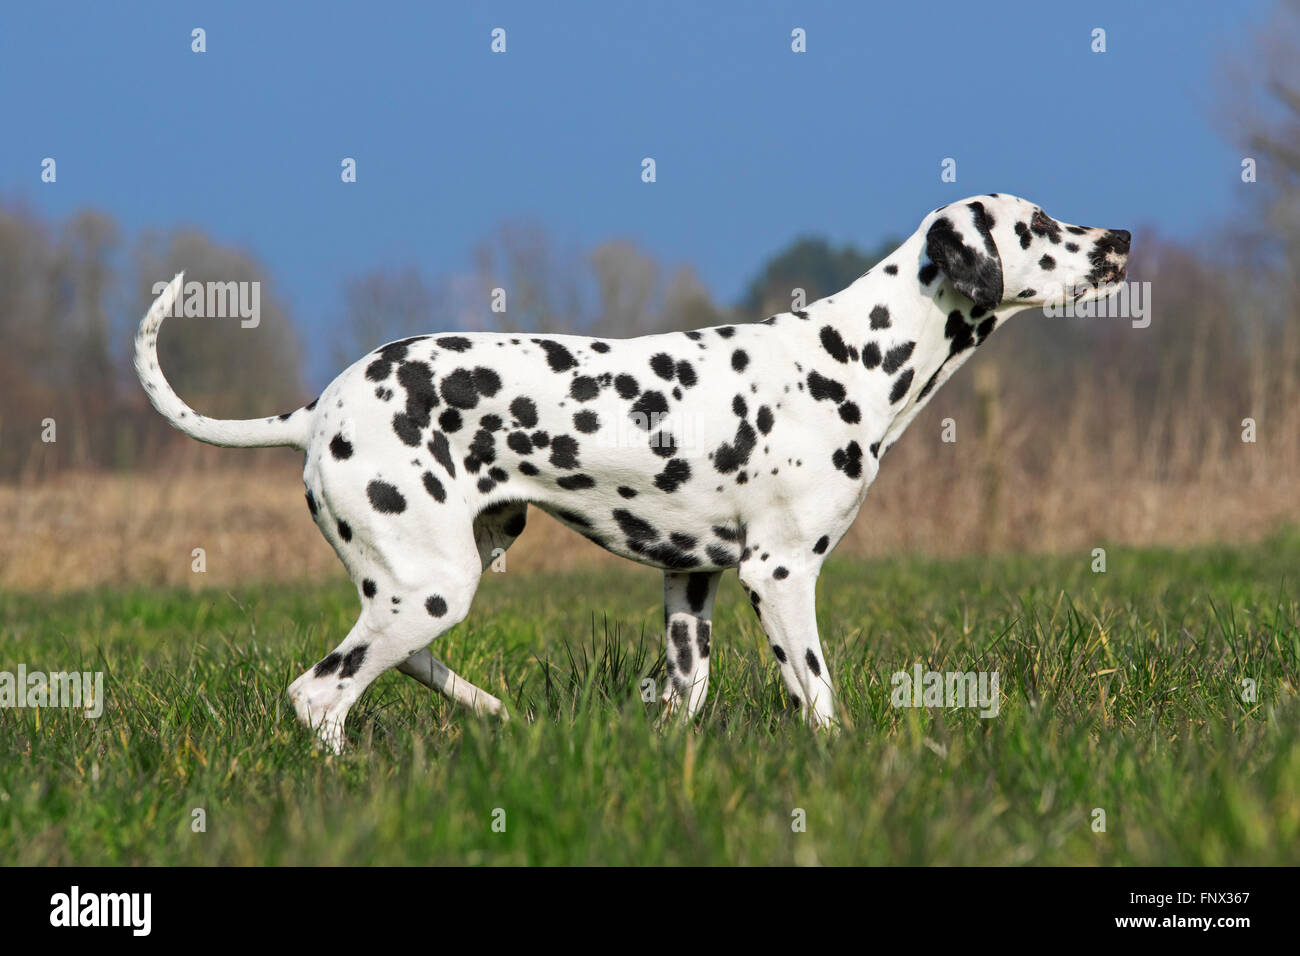 Chien dalmatien / transport / spotted coach dog in field Banque D'Images